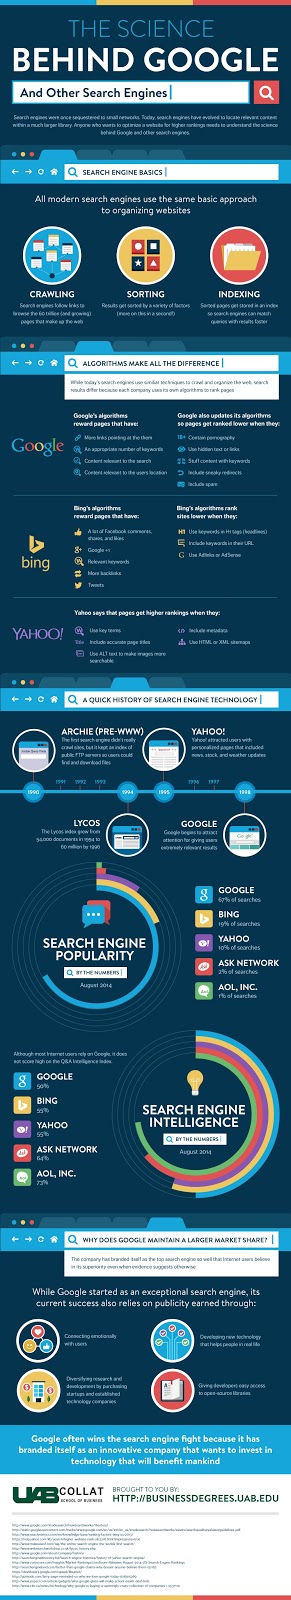 The Science Behind Google [Infographic]